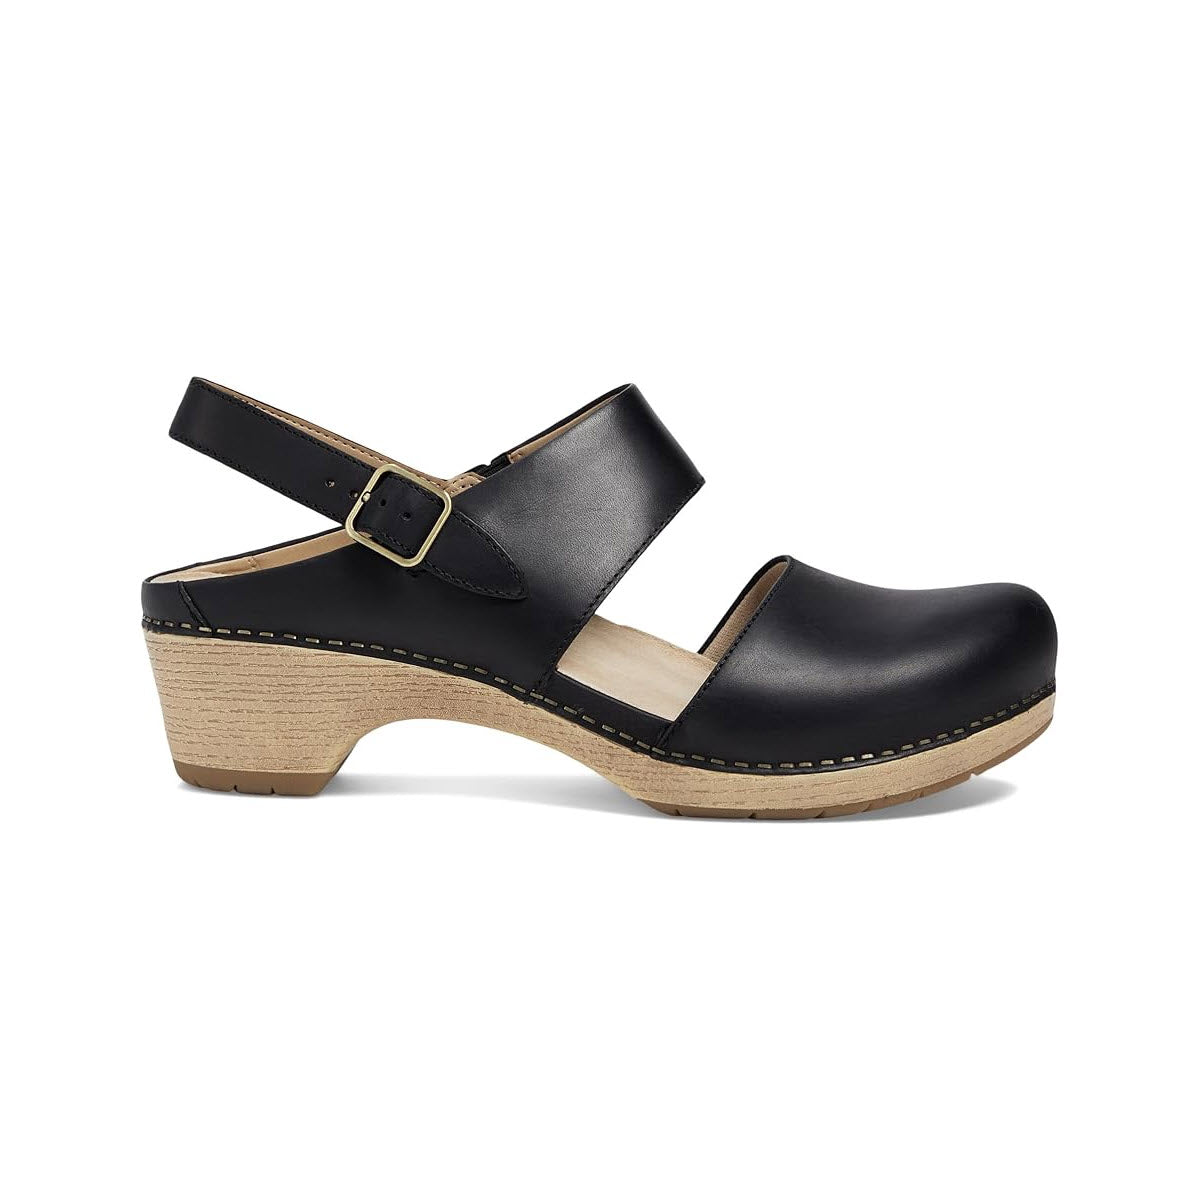 A Dansko Lucia Black - Womens leather clog with an adjustable heel strap, set on a wooden heel and platform, isolated on a white background.